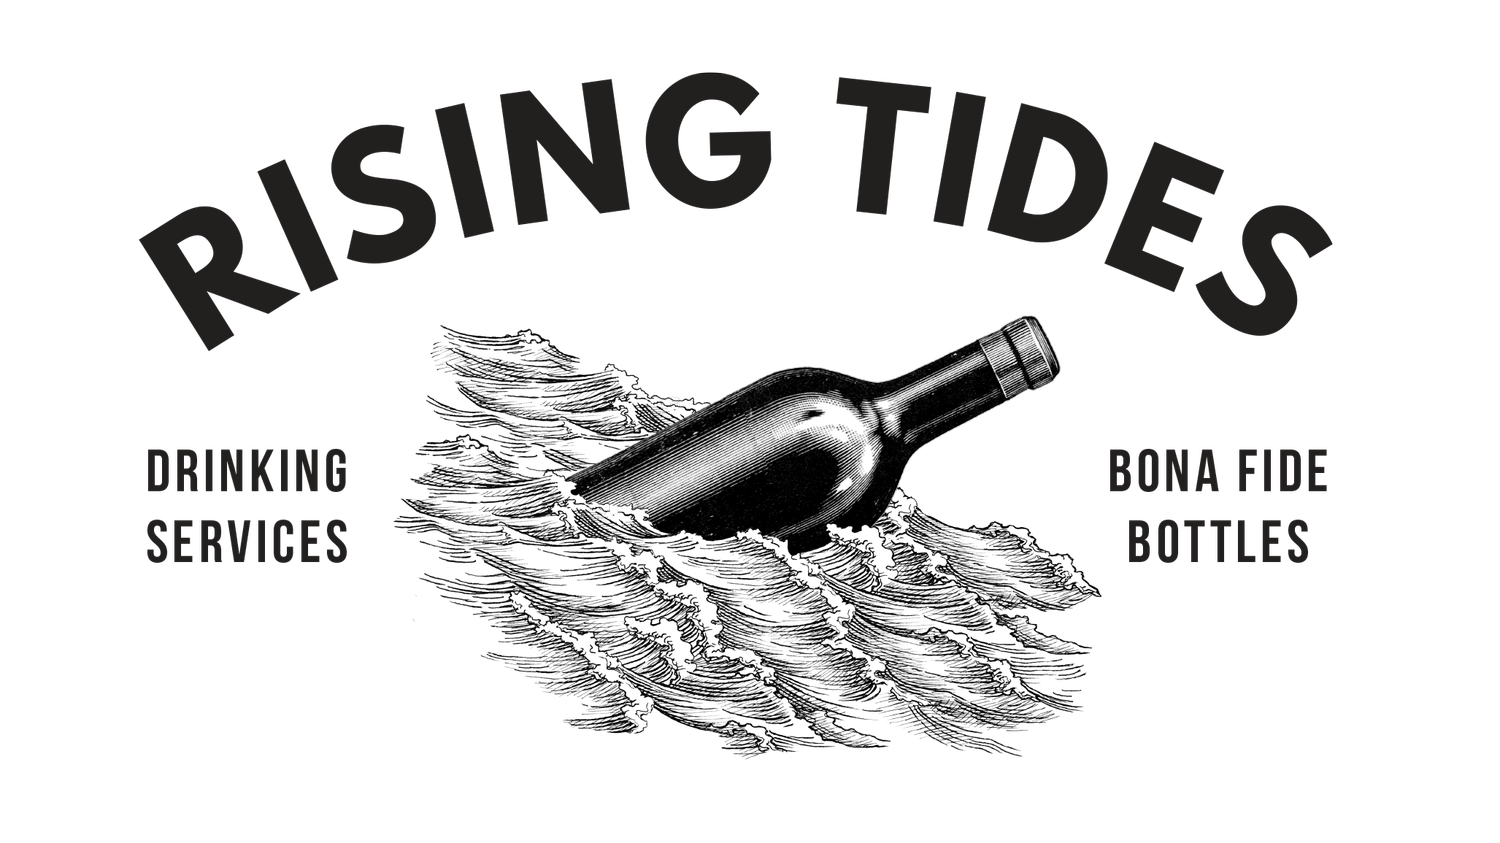 Rising Tides Drinking Services